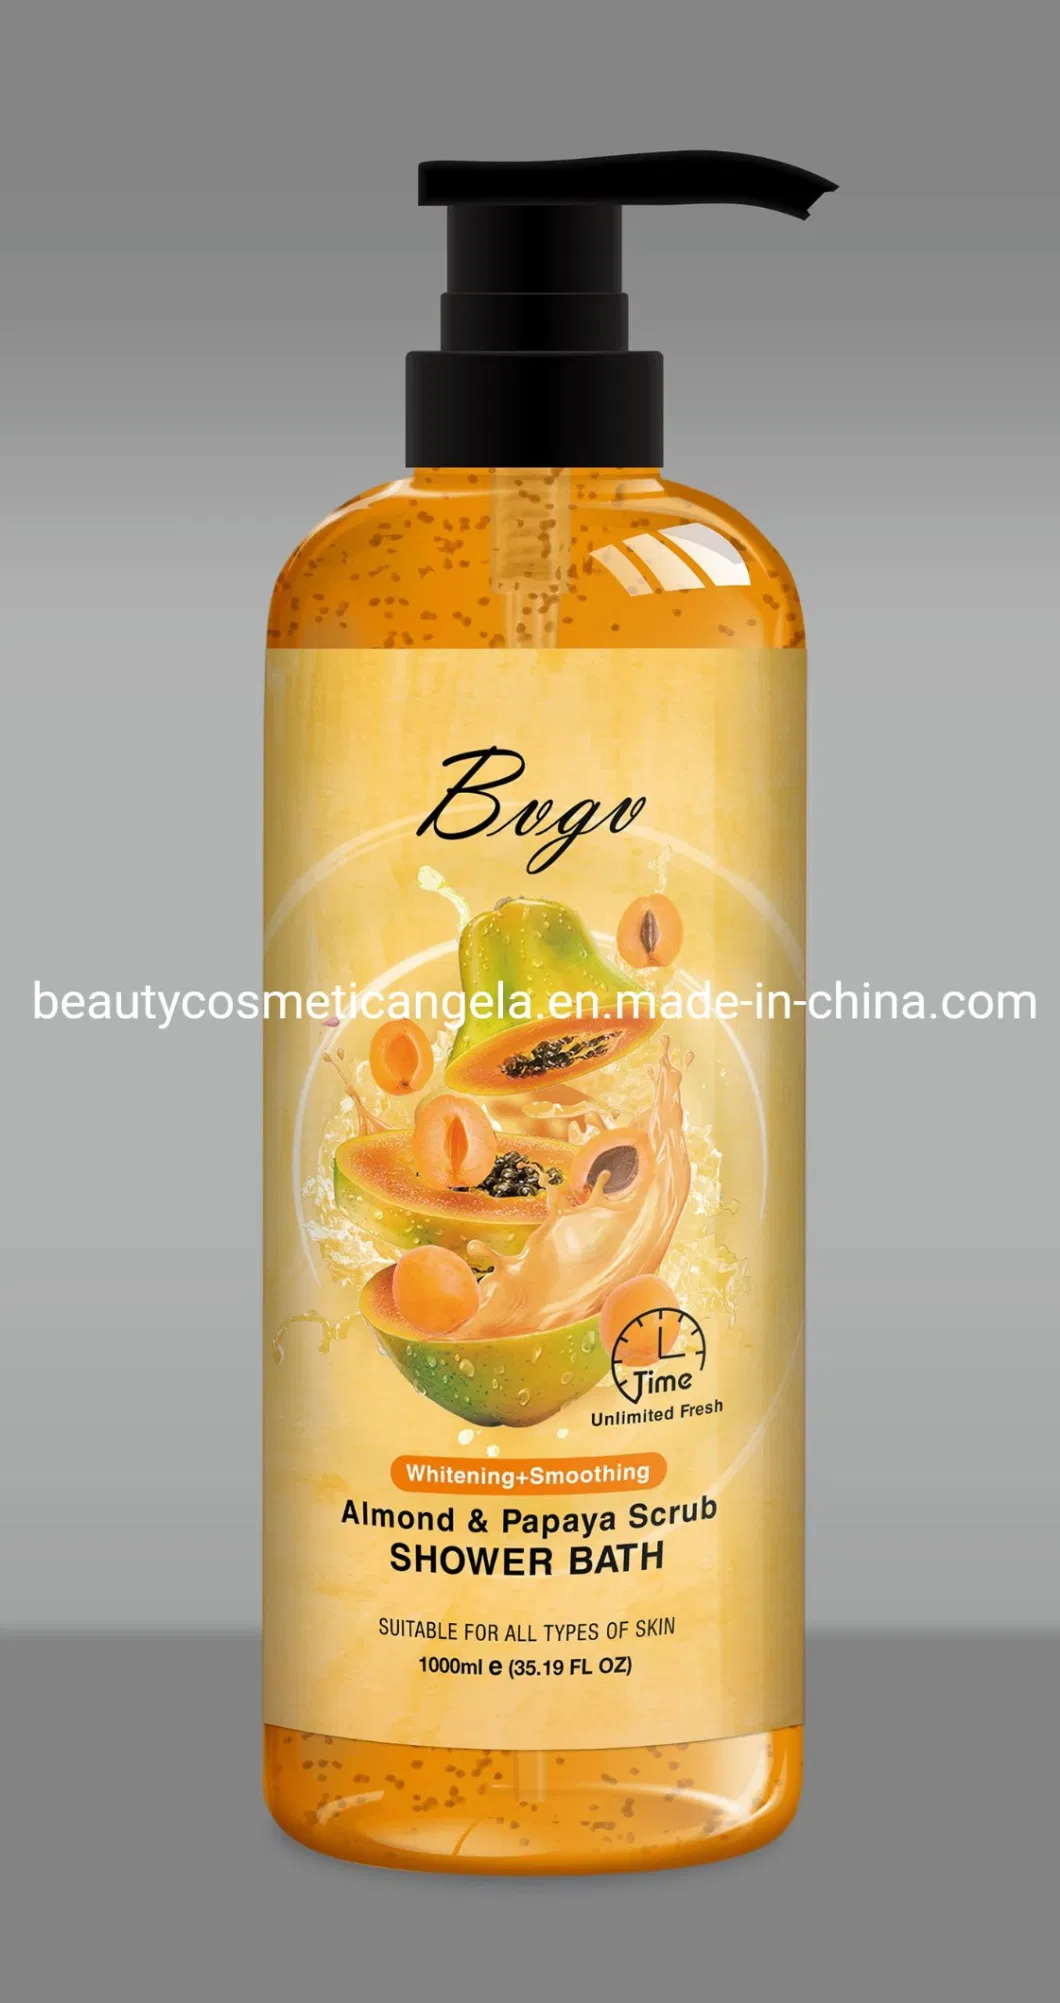 Shea Butter Brightening Whitening Body Cream Body Lotion Shower for Coffee Color Skin